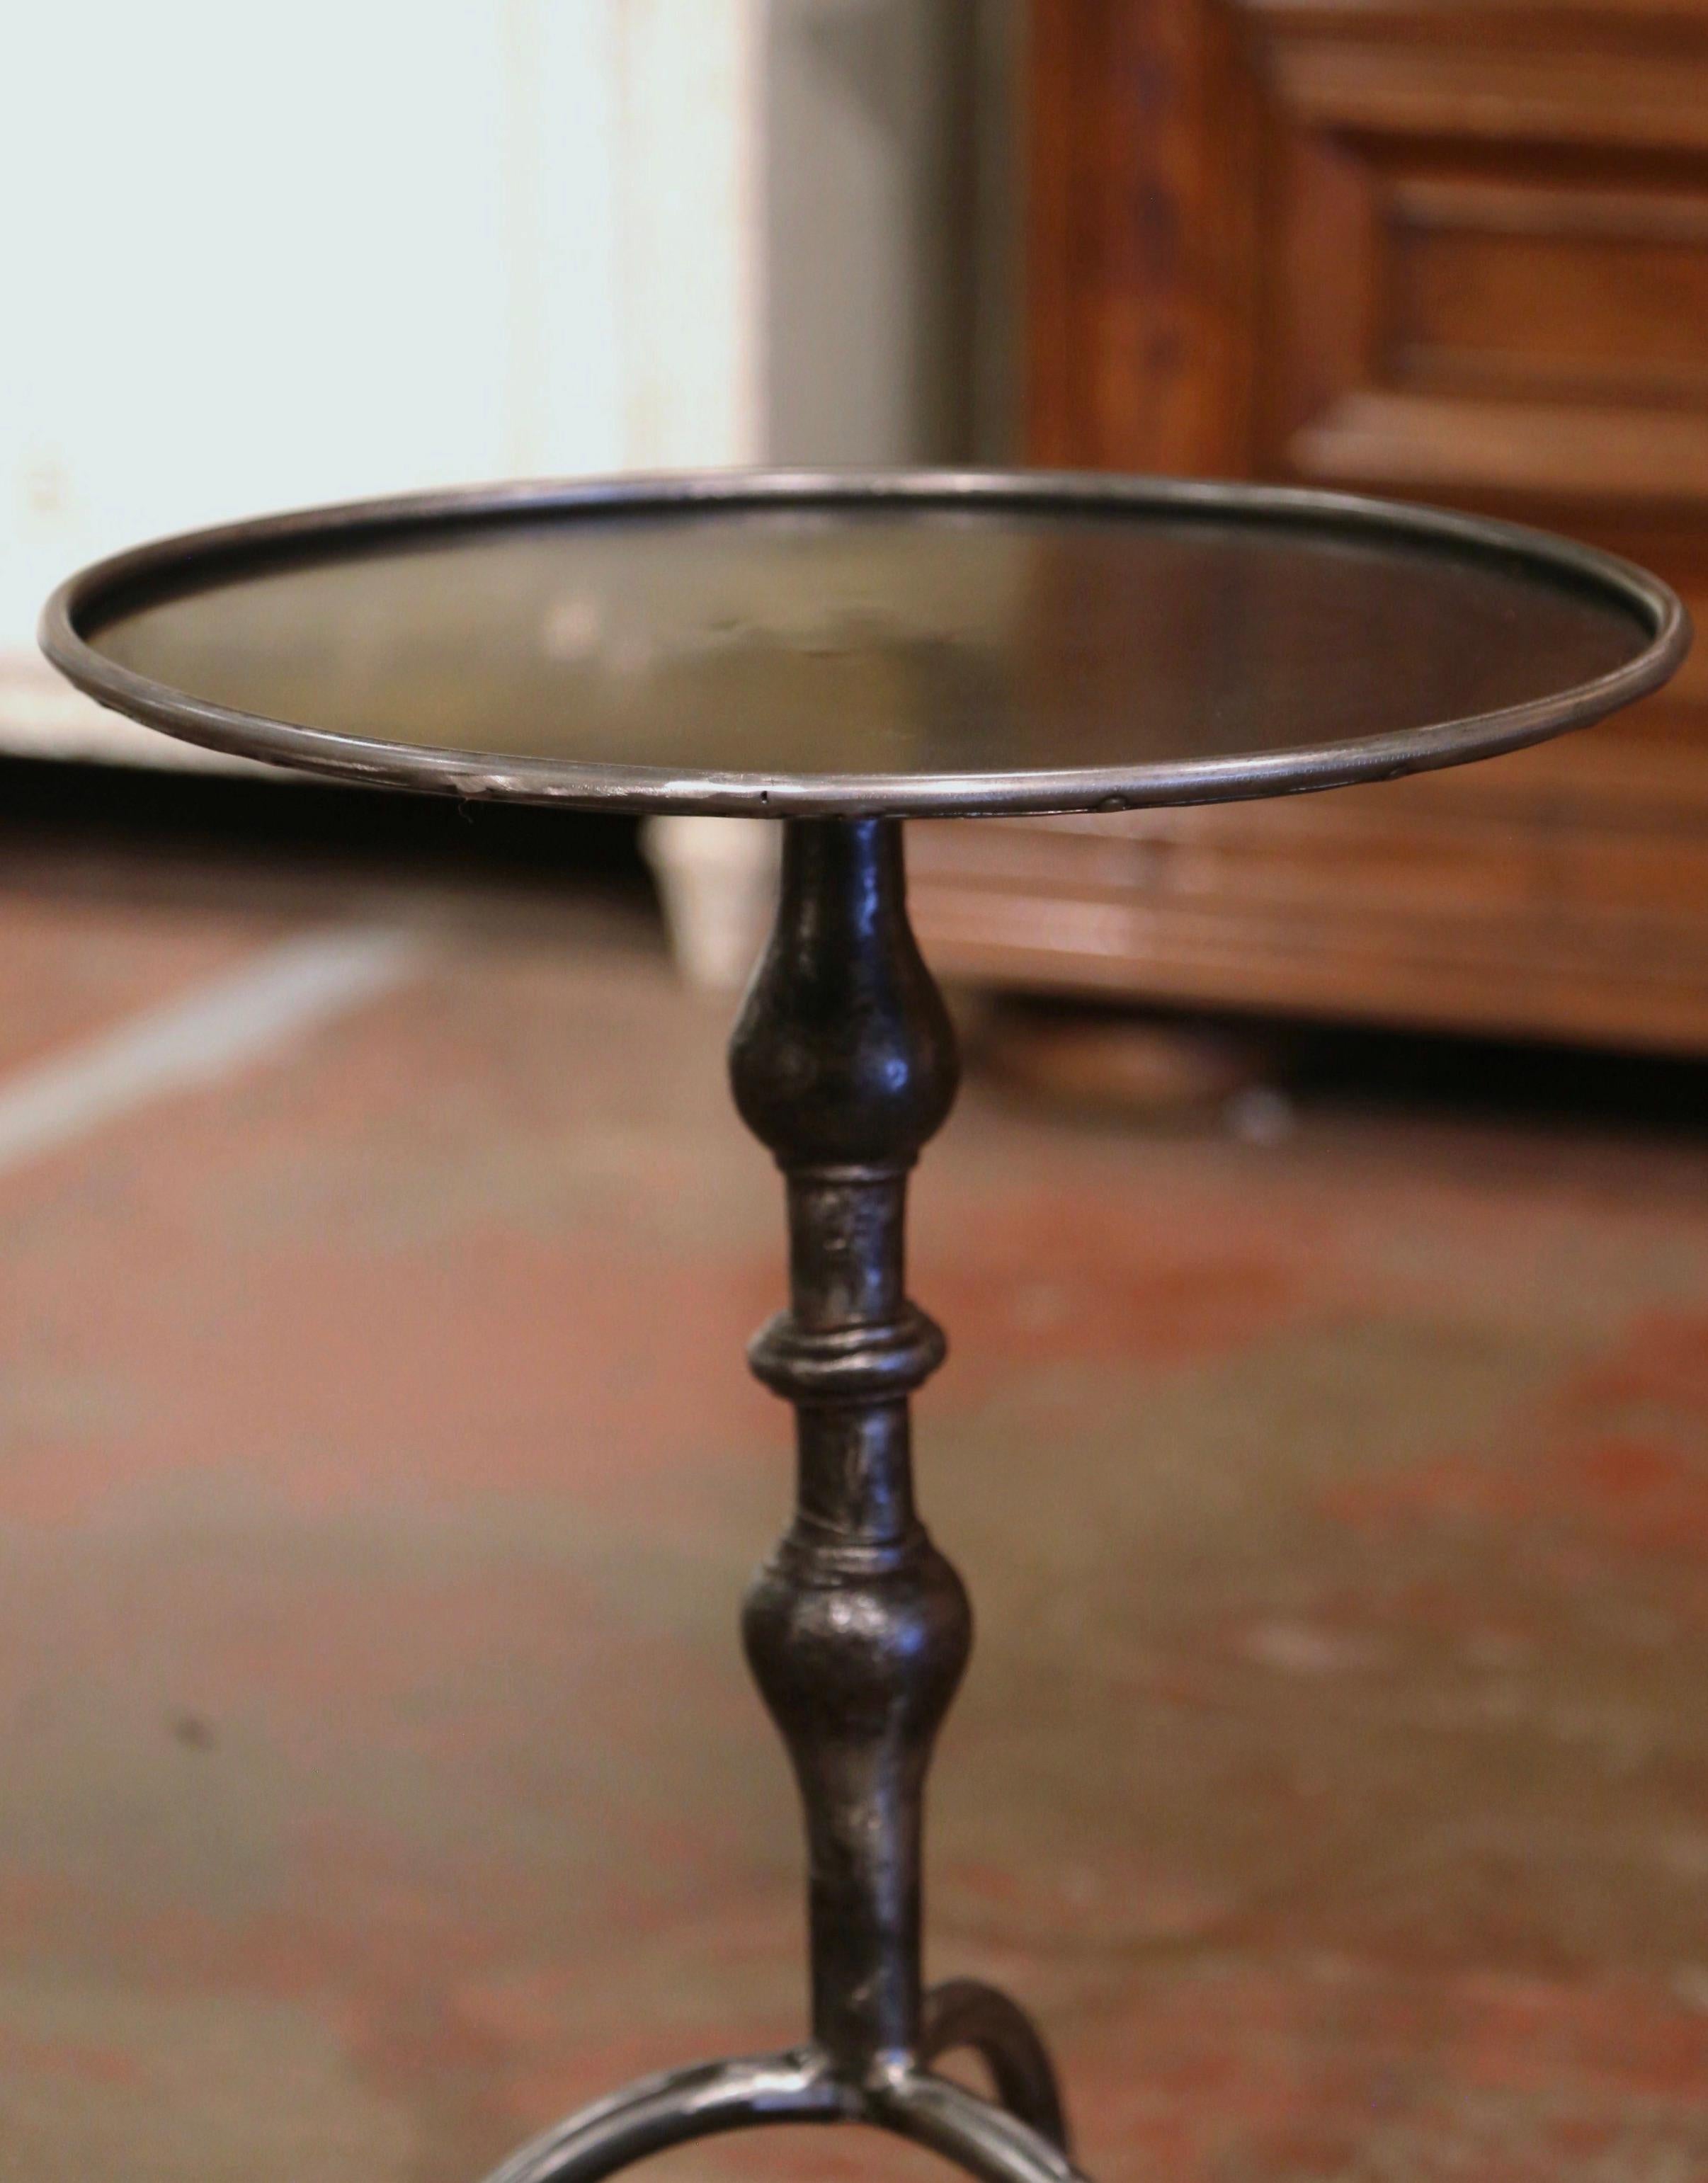 This elegant, antique pedestal table was crafted in Southern France, circa 1960. The martini table features a central turned pedestal stem over three curved legs ending with small feet. The serving table is topped with a round surface from later